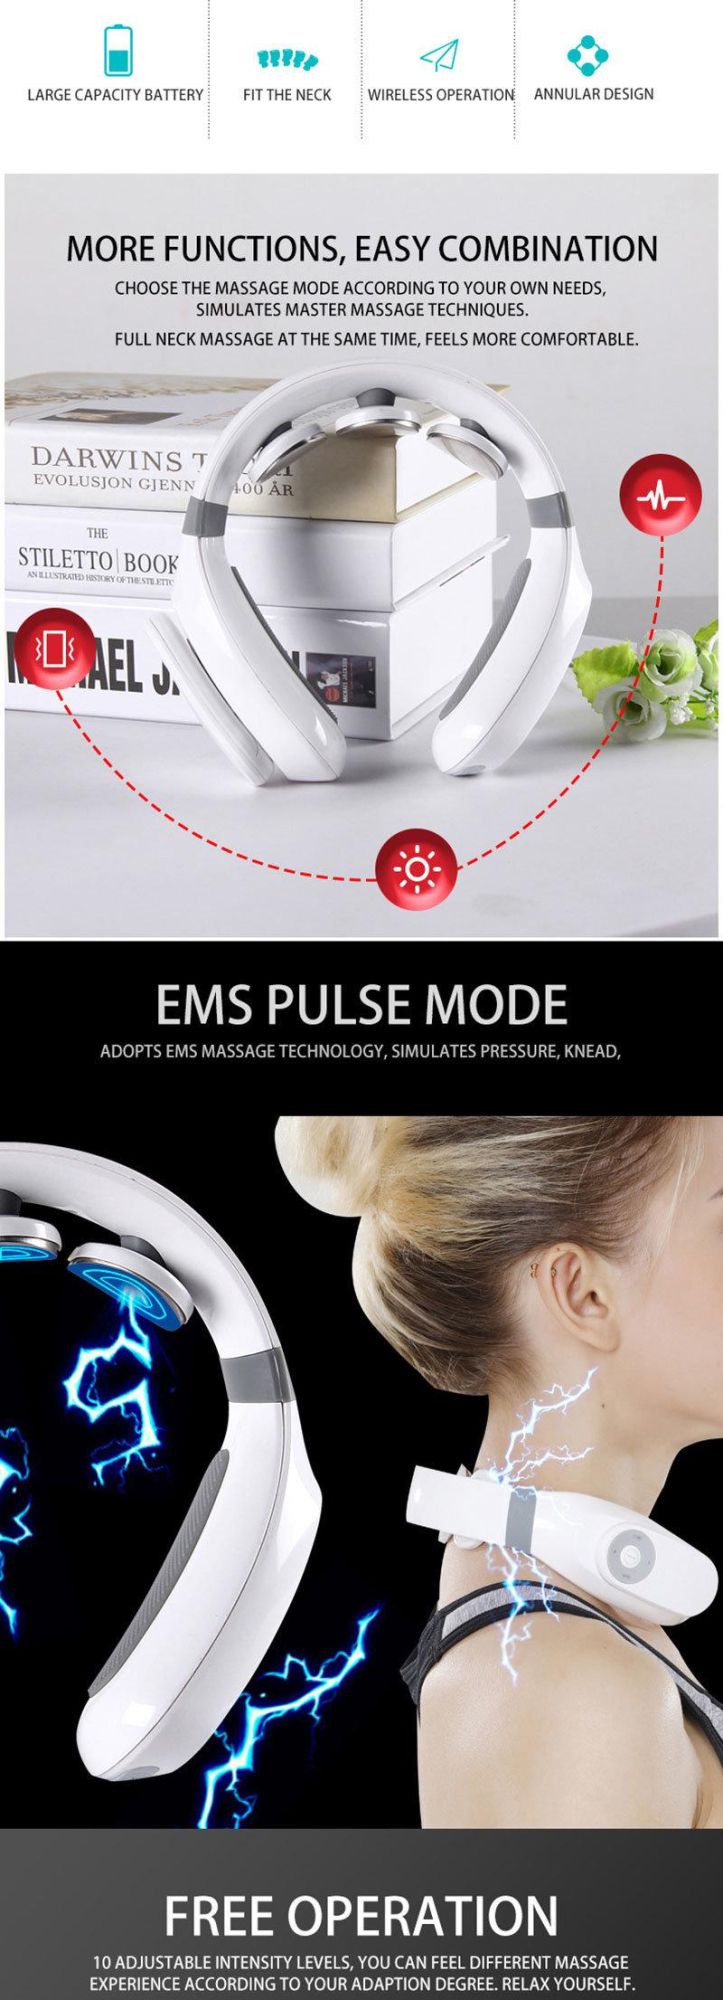 Electric Heating Physical Therapy Neck Massager Smart Wireless Pulse Neck Massage Device